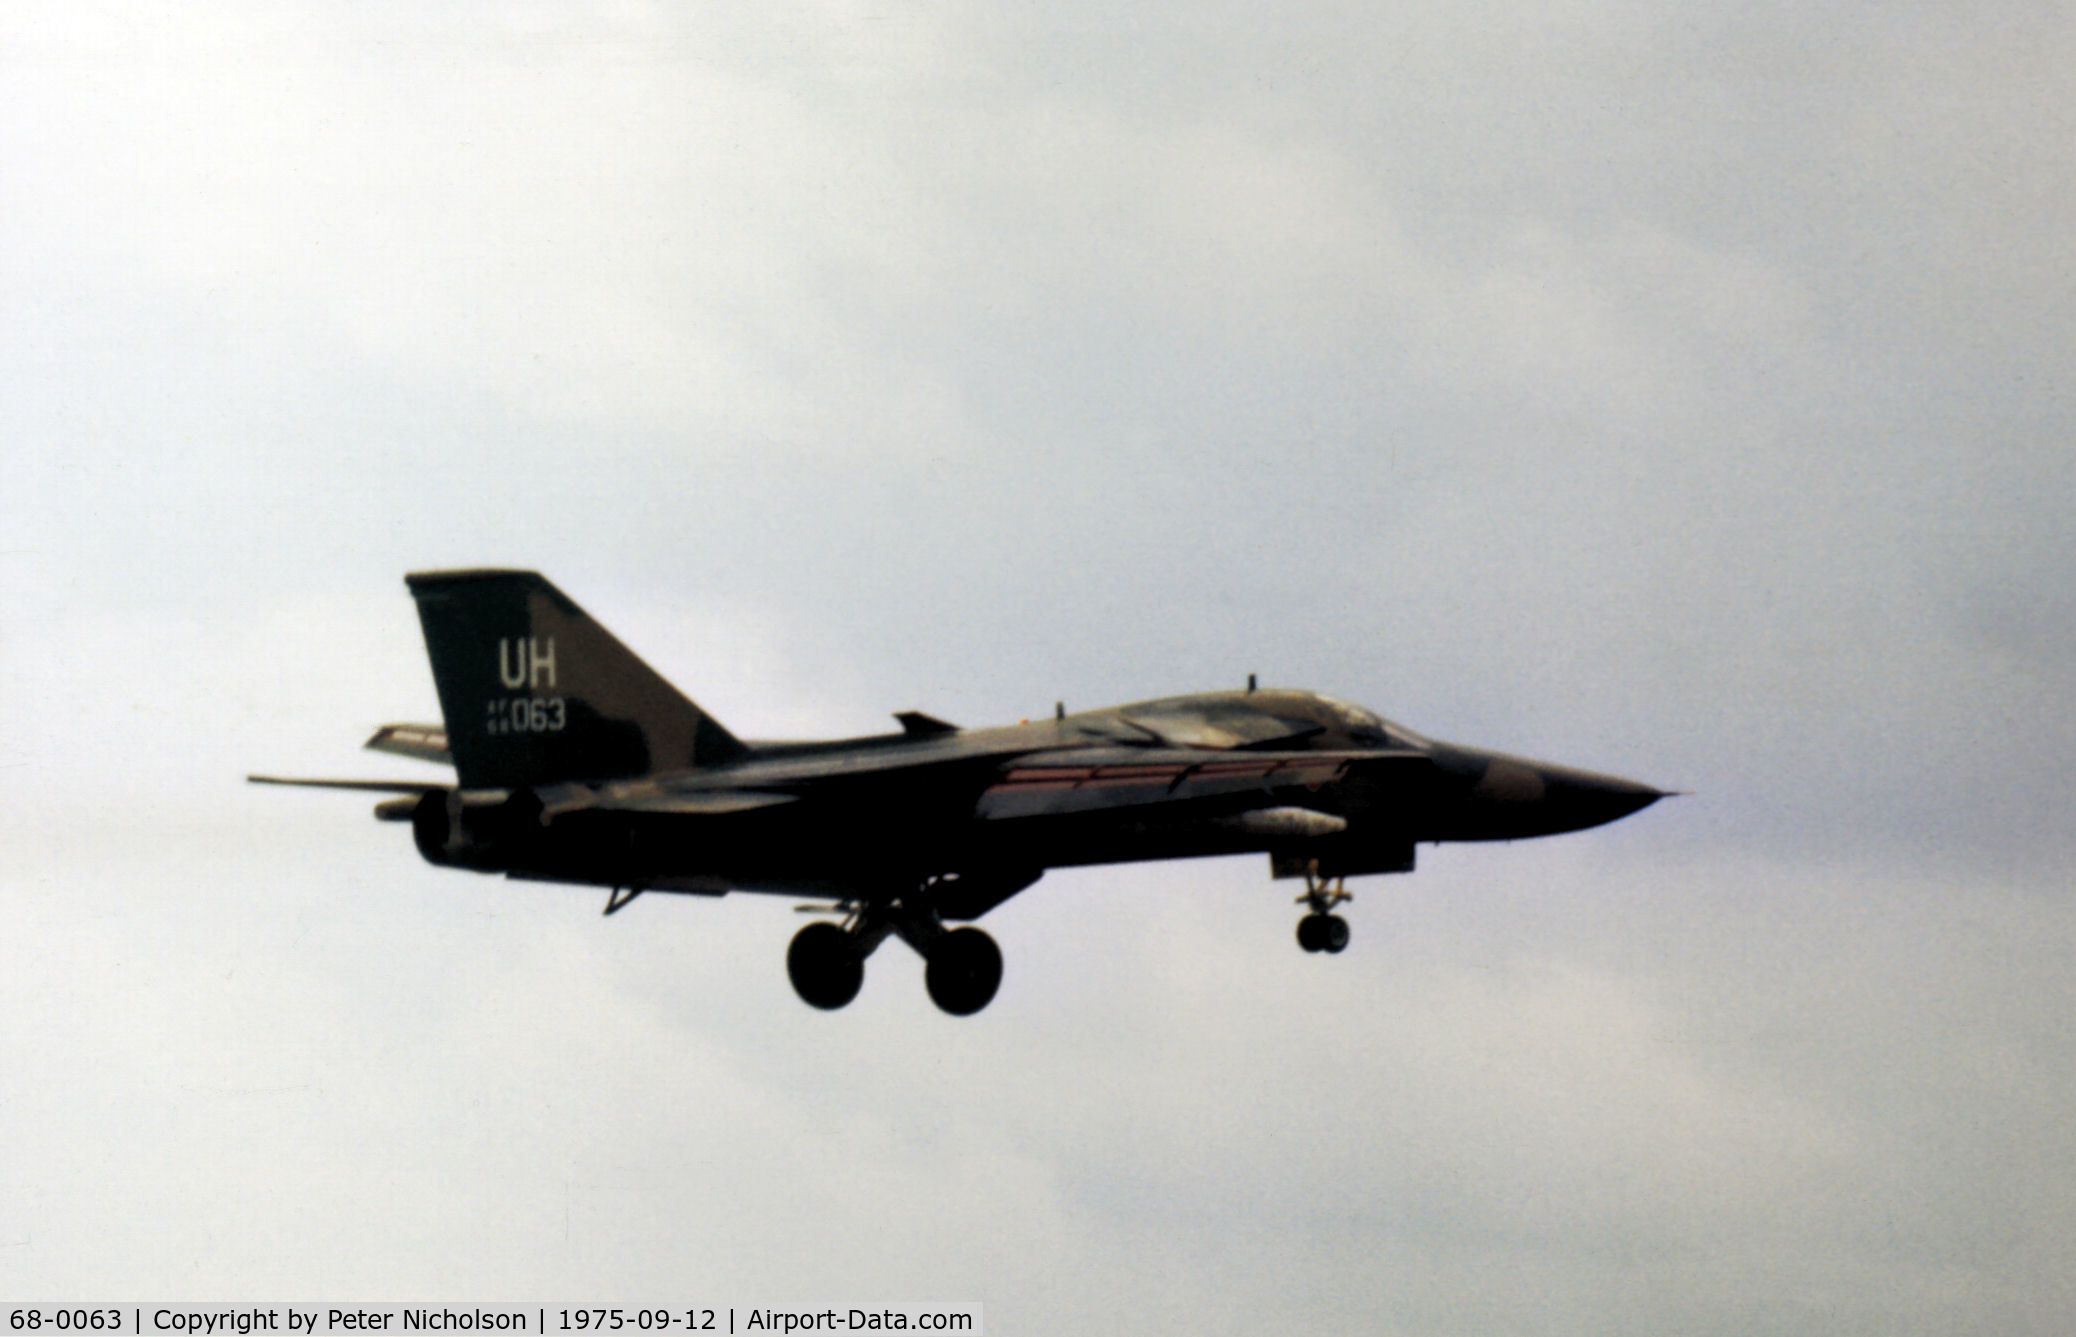 68-0063, 1968 General Dynamics F-111E Aardvark C/N A1-232, F-111E of 77th Tactical Fighter Squadron/20th Tactical Fighter Wing returning to RAF Upper Heyford in September 1975.